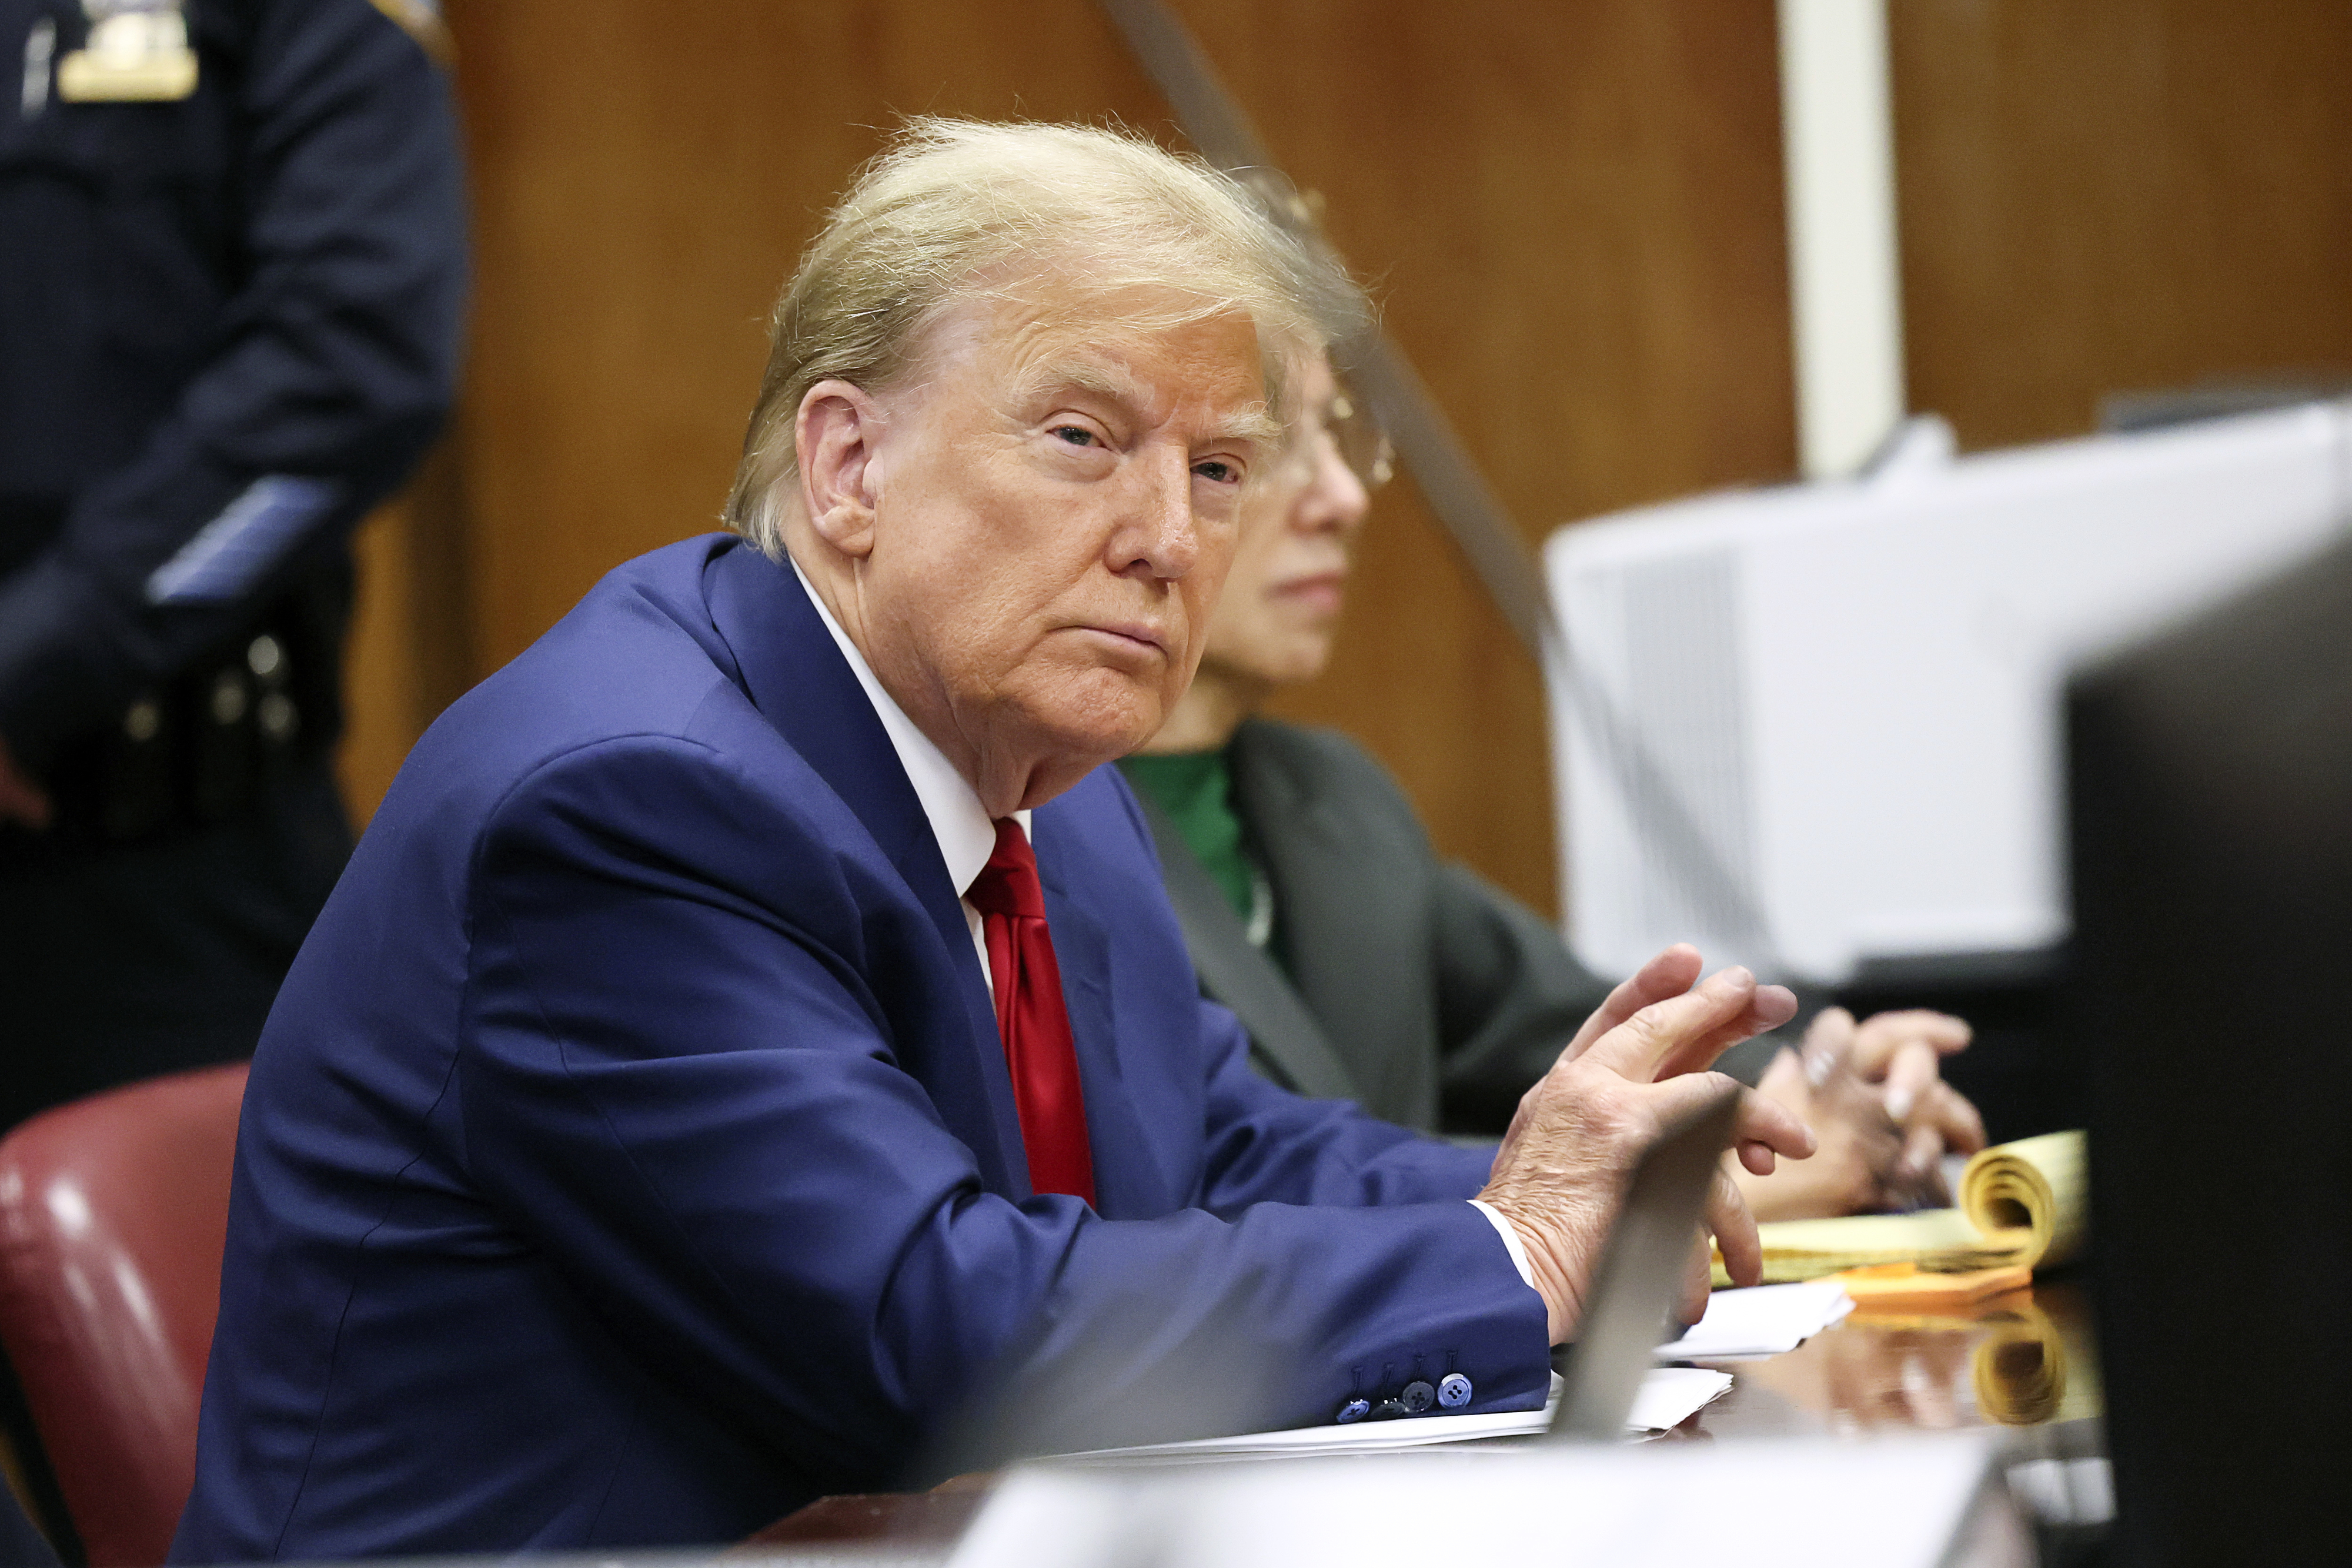 Former President Donald Trump sitting in court with documents on a table, looking towards the camera